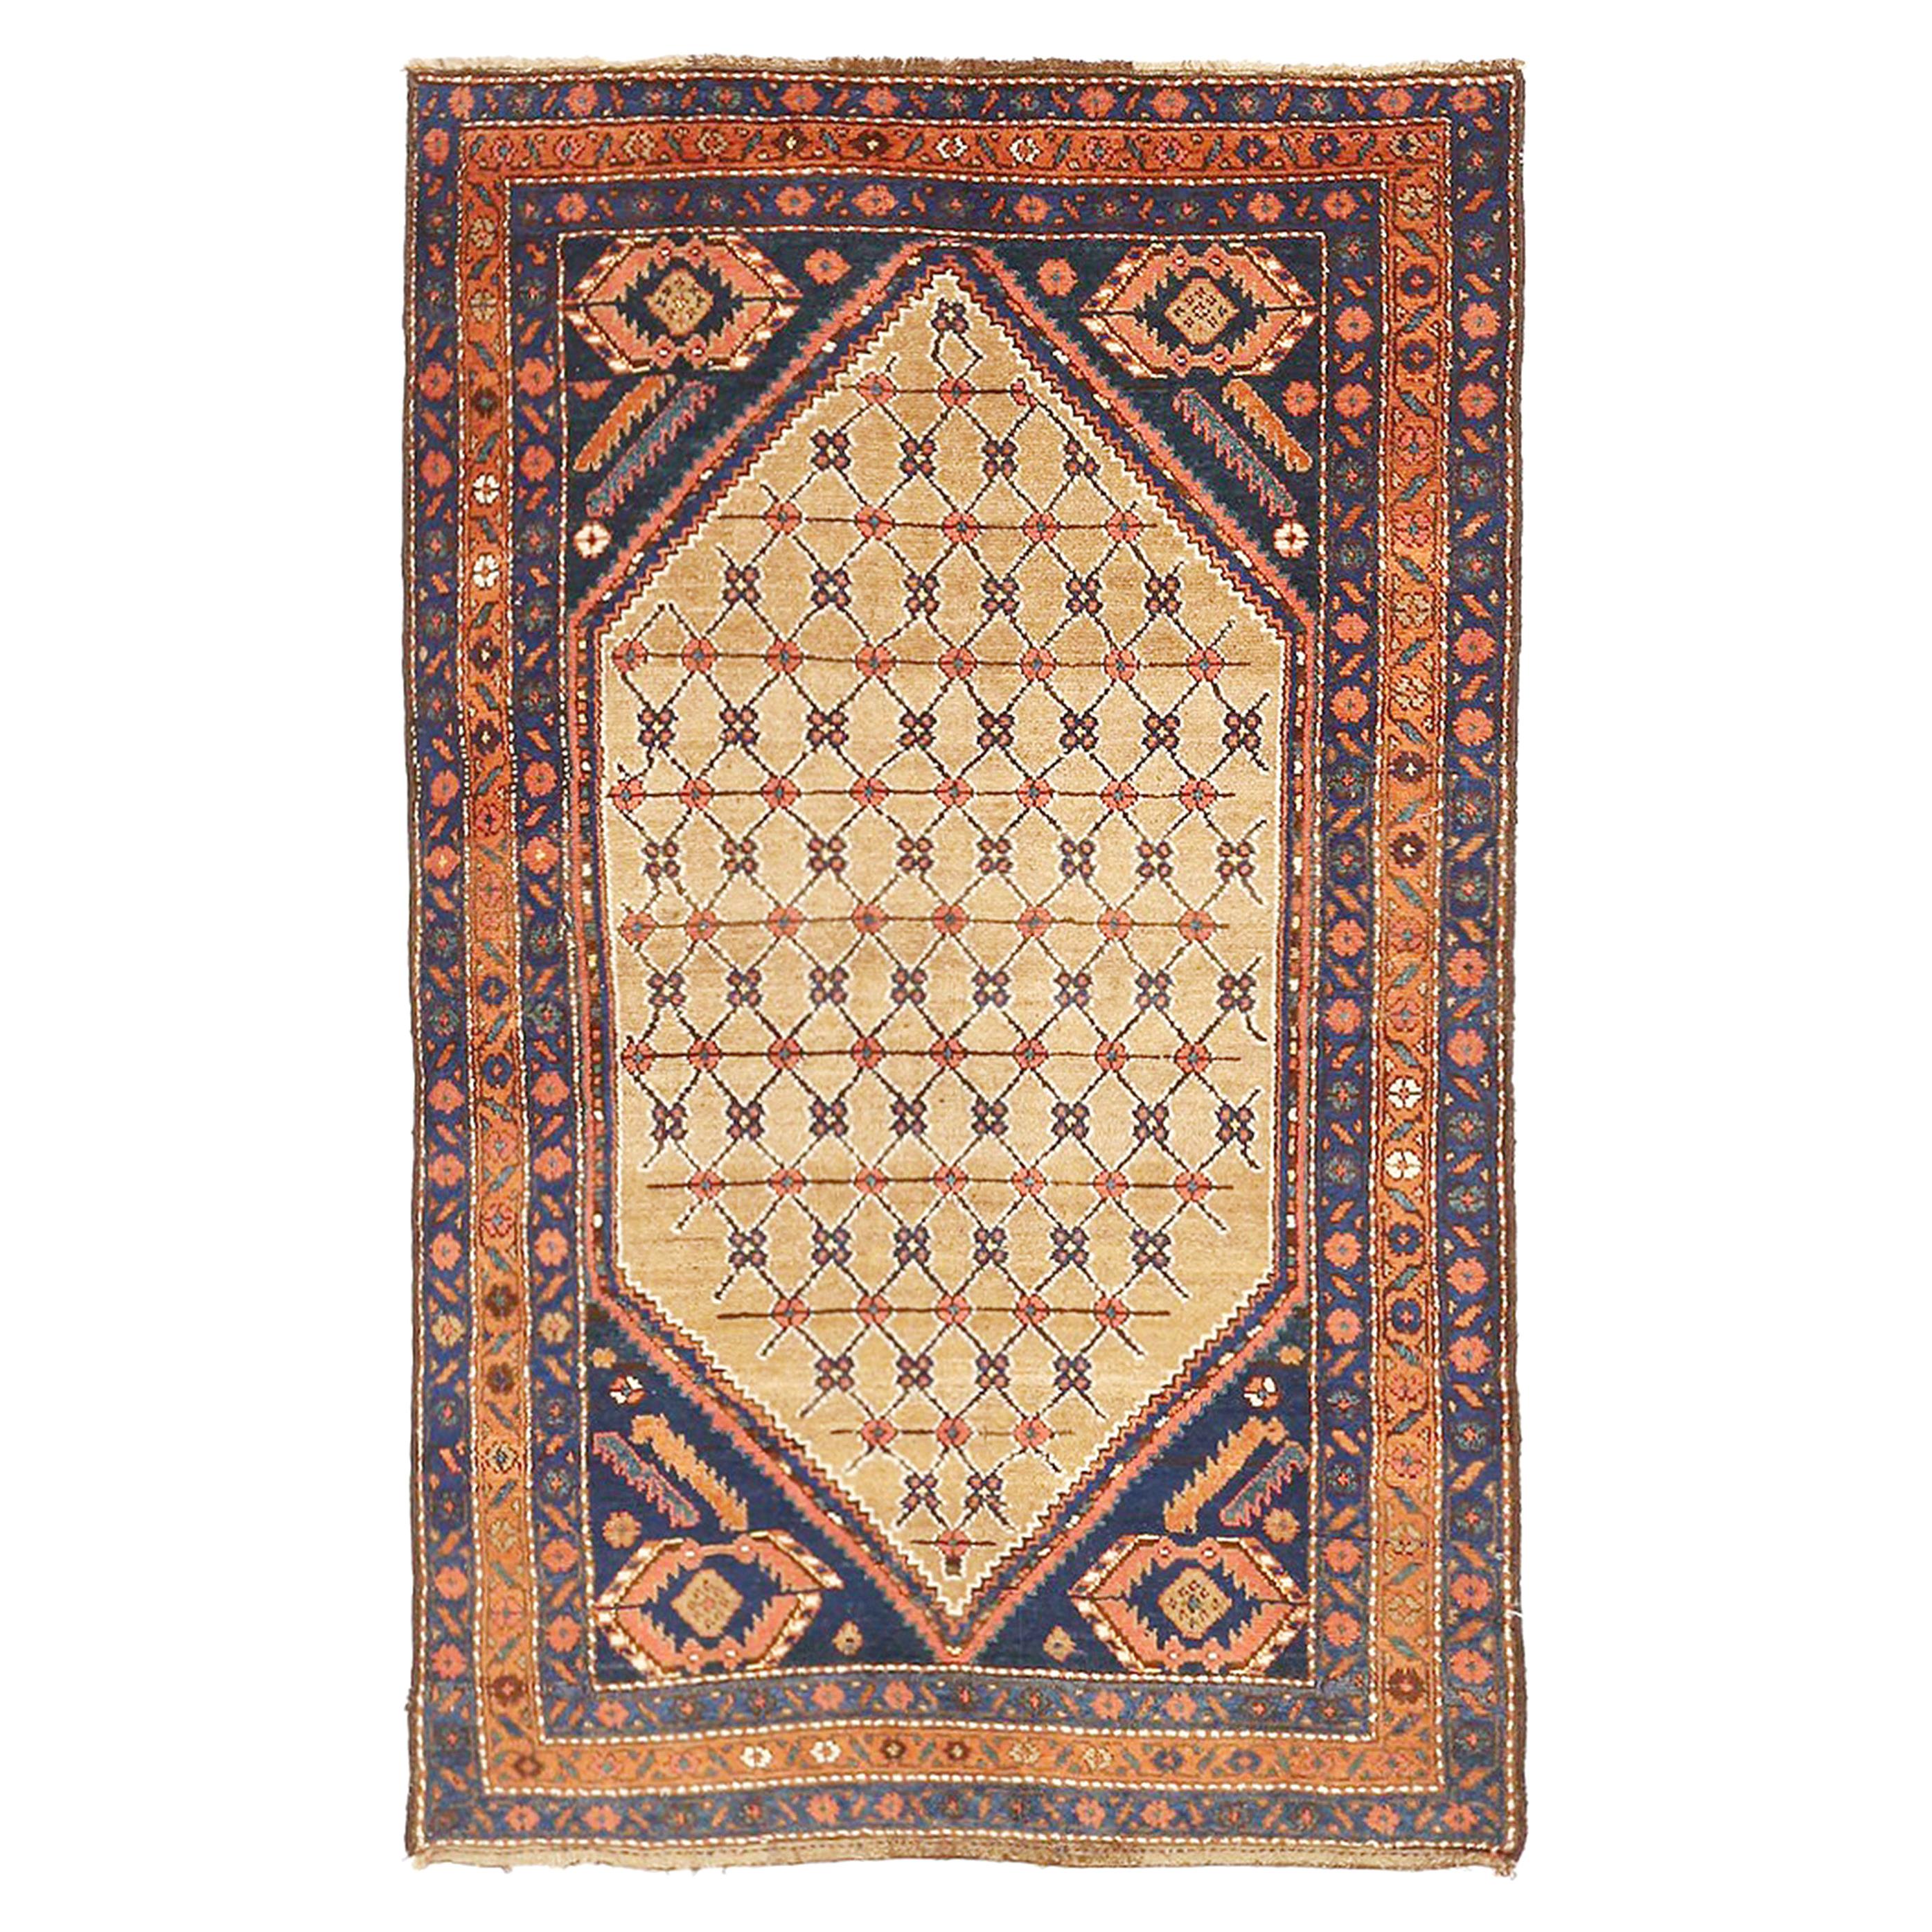 Antique Persian Hamadan Rug with Large Flower Medallion on Center Field